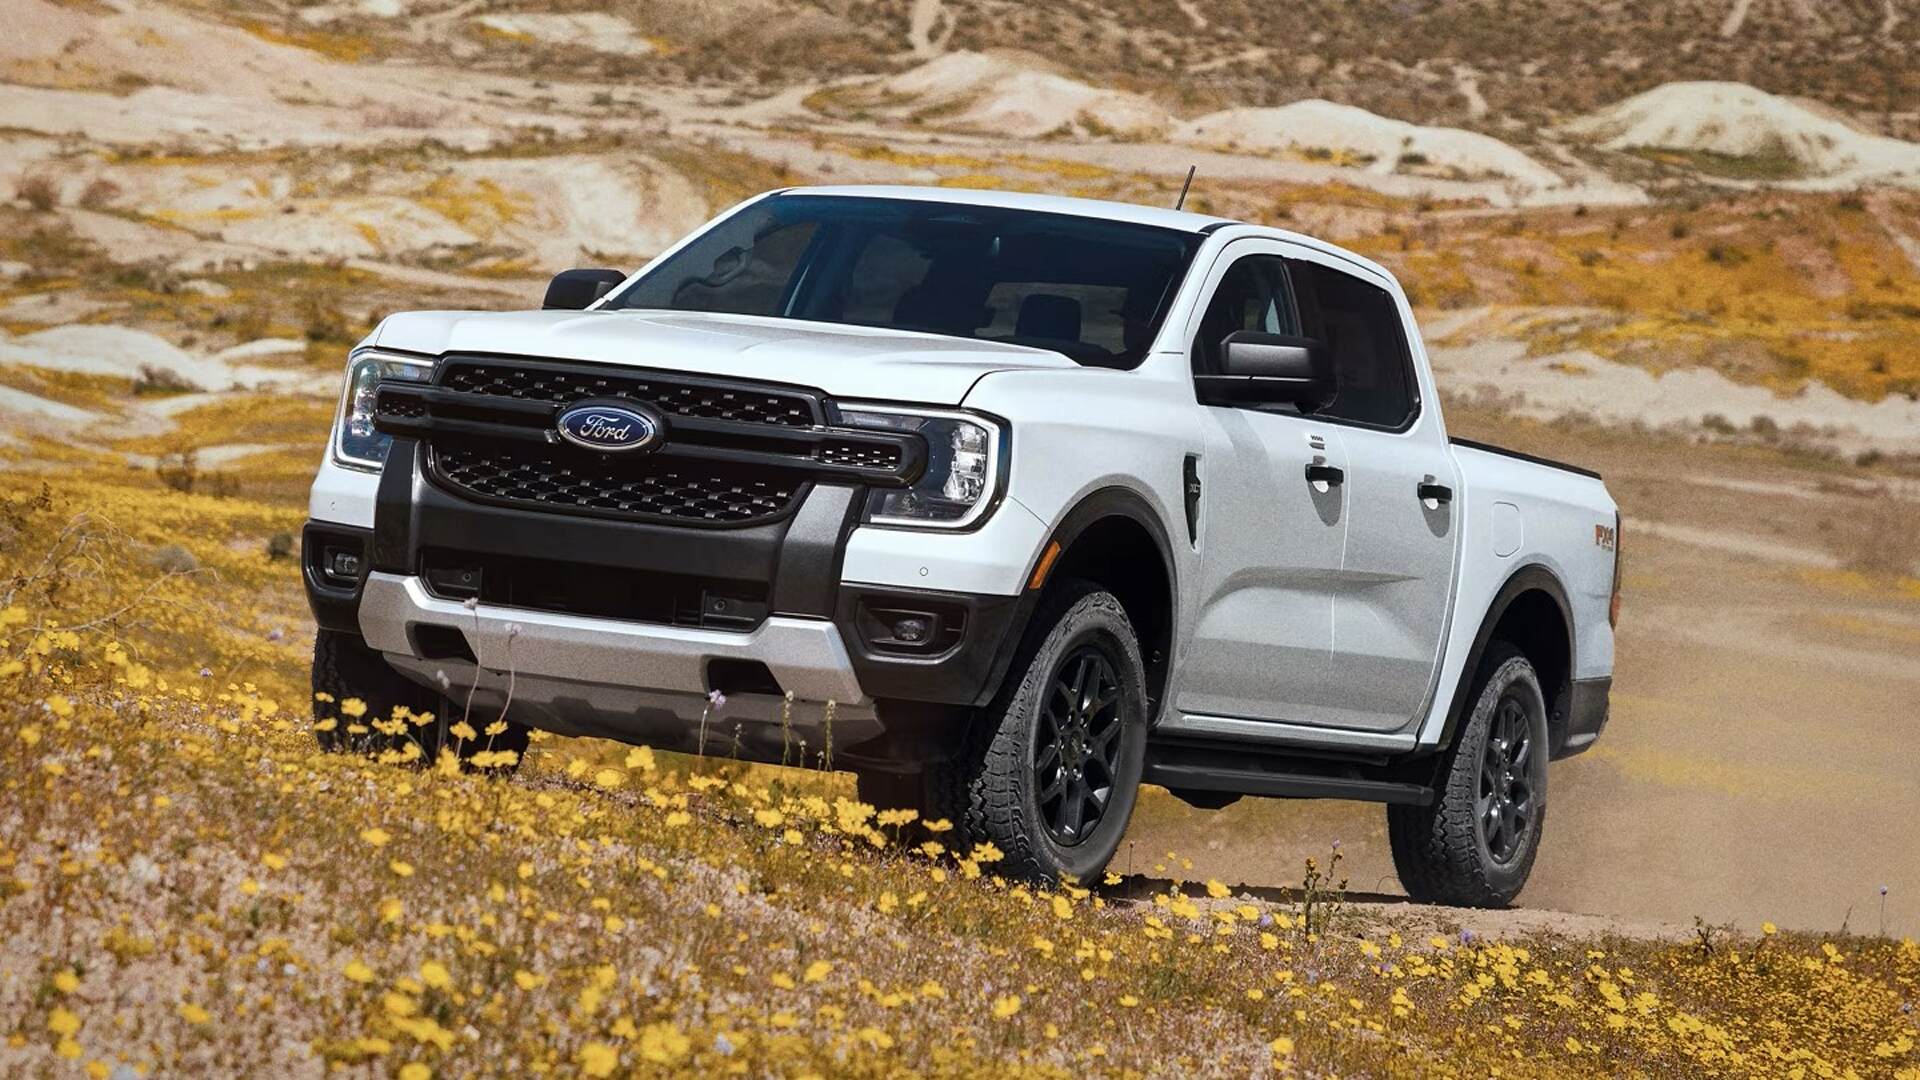 A Ford Ranger In Oxford White Exterior Shade (Credits Ford)